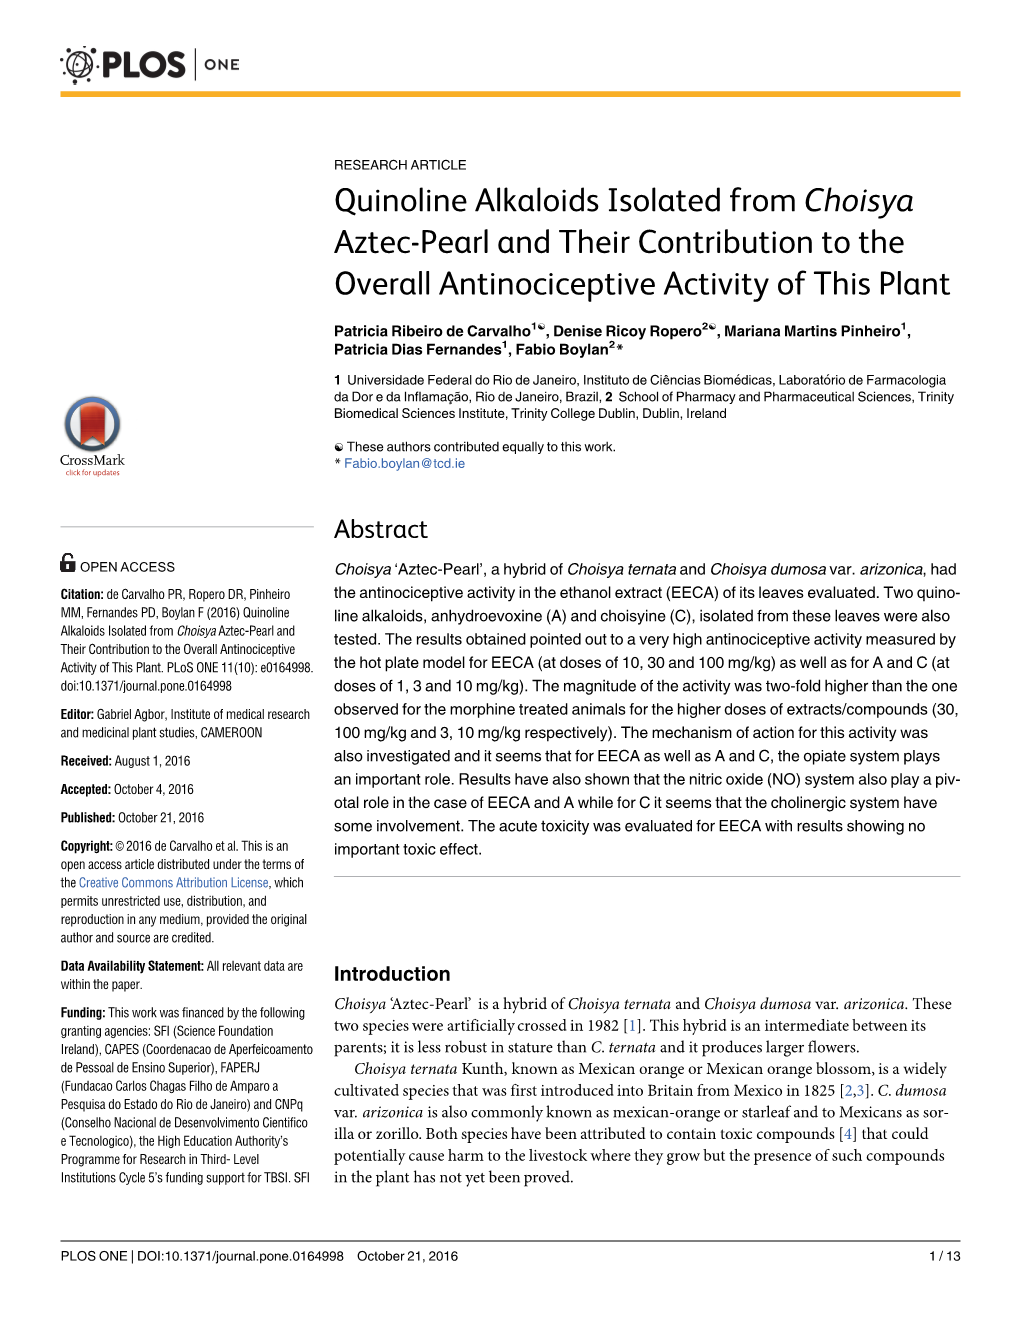 Quinoline Alkaloids Isolated from Choisya Aztec-Pearl and Their Contribution to the Overall Antinociceptive Activity of This Plant